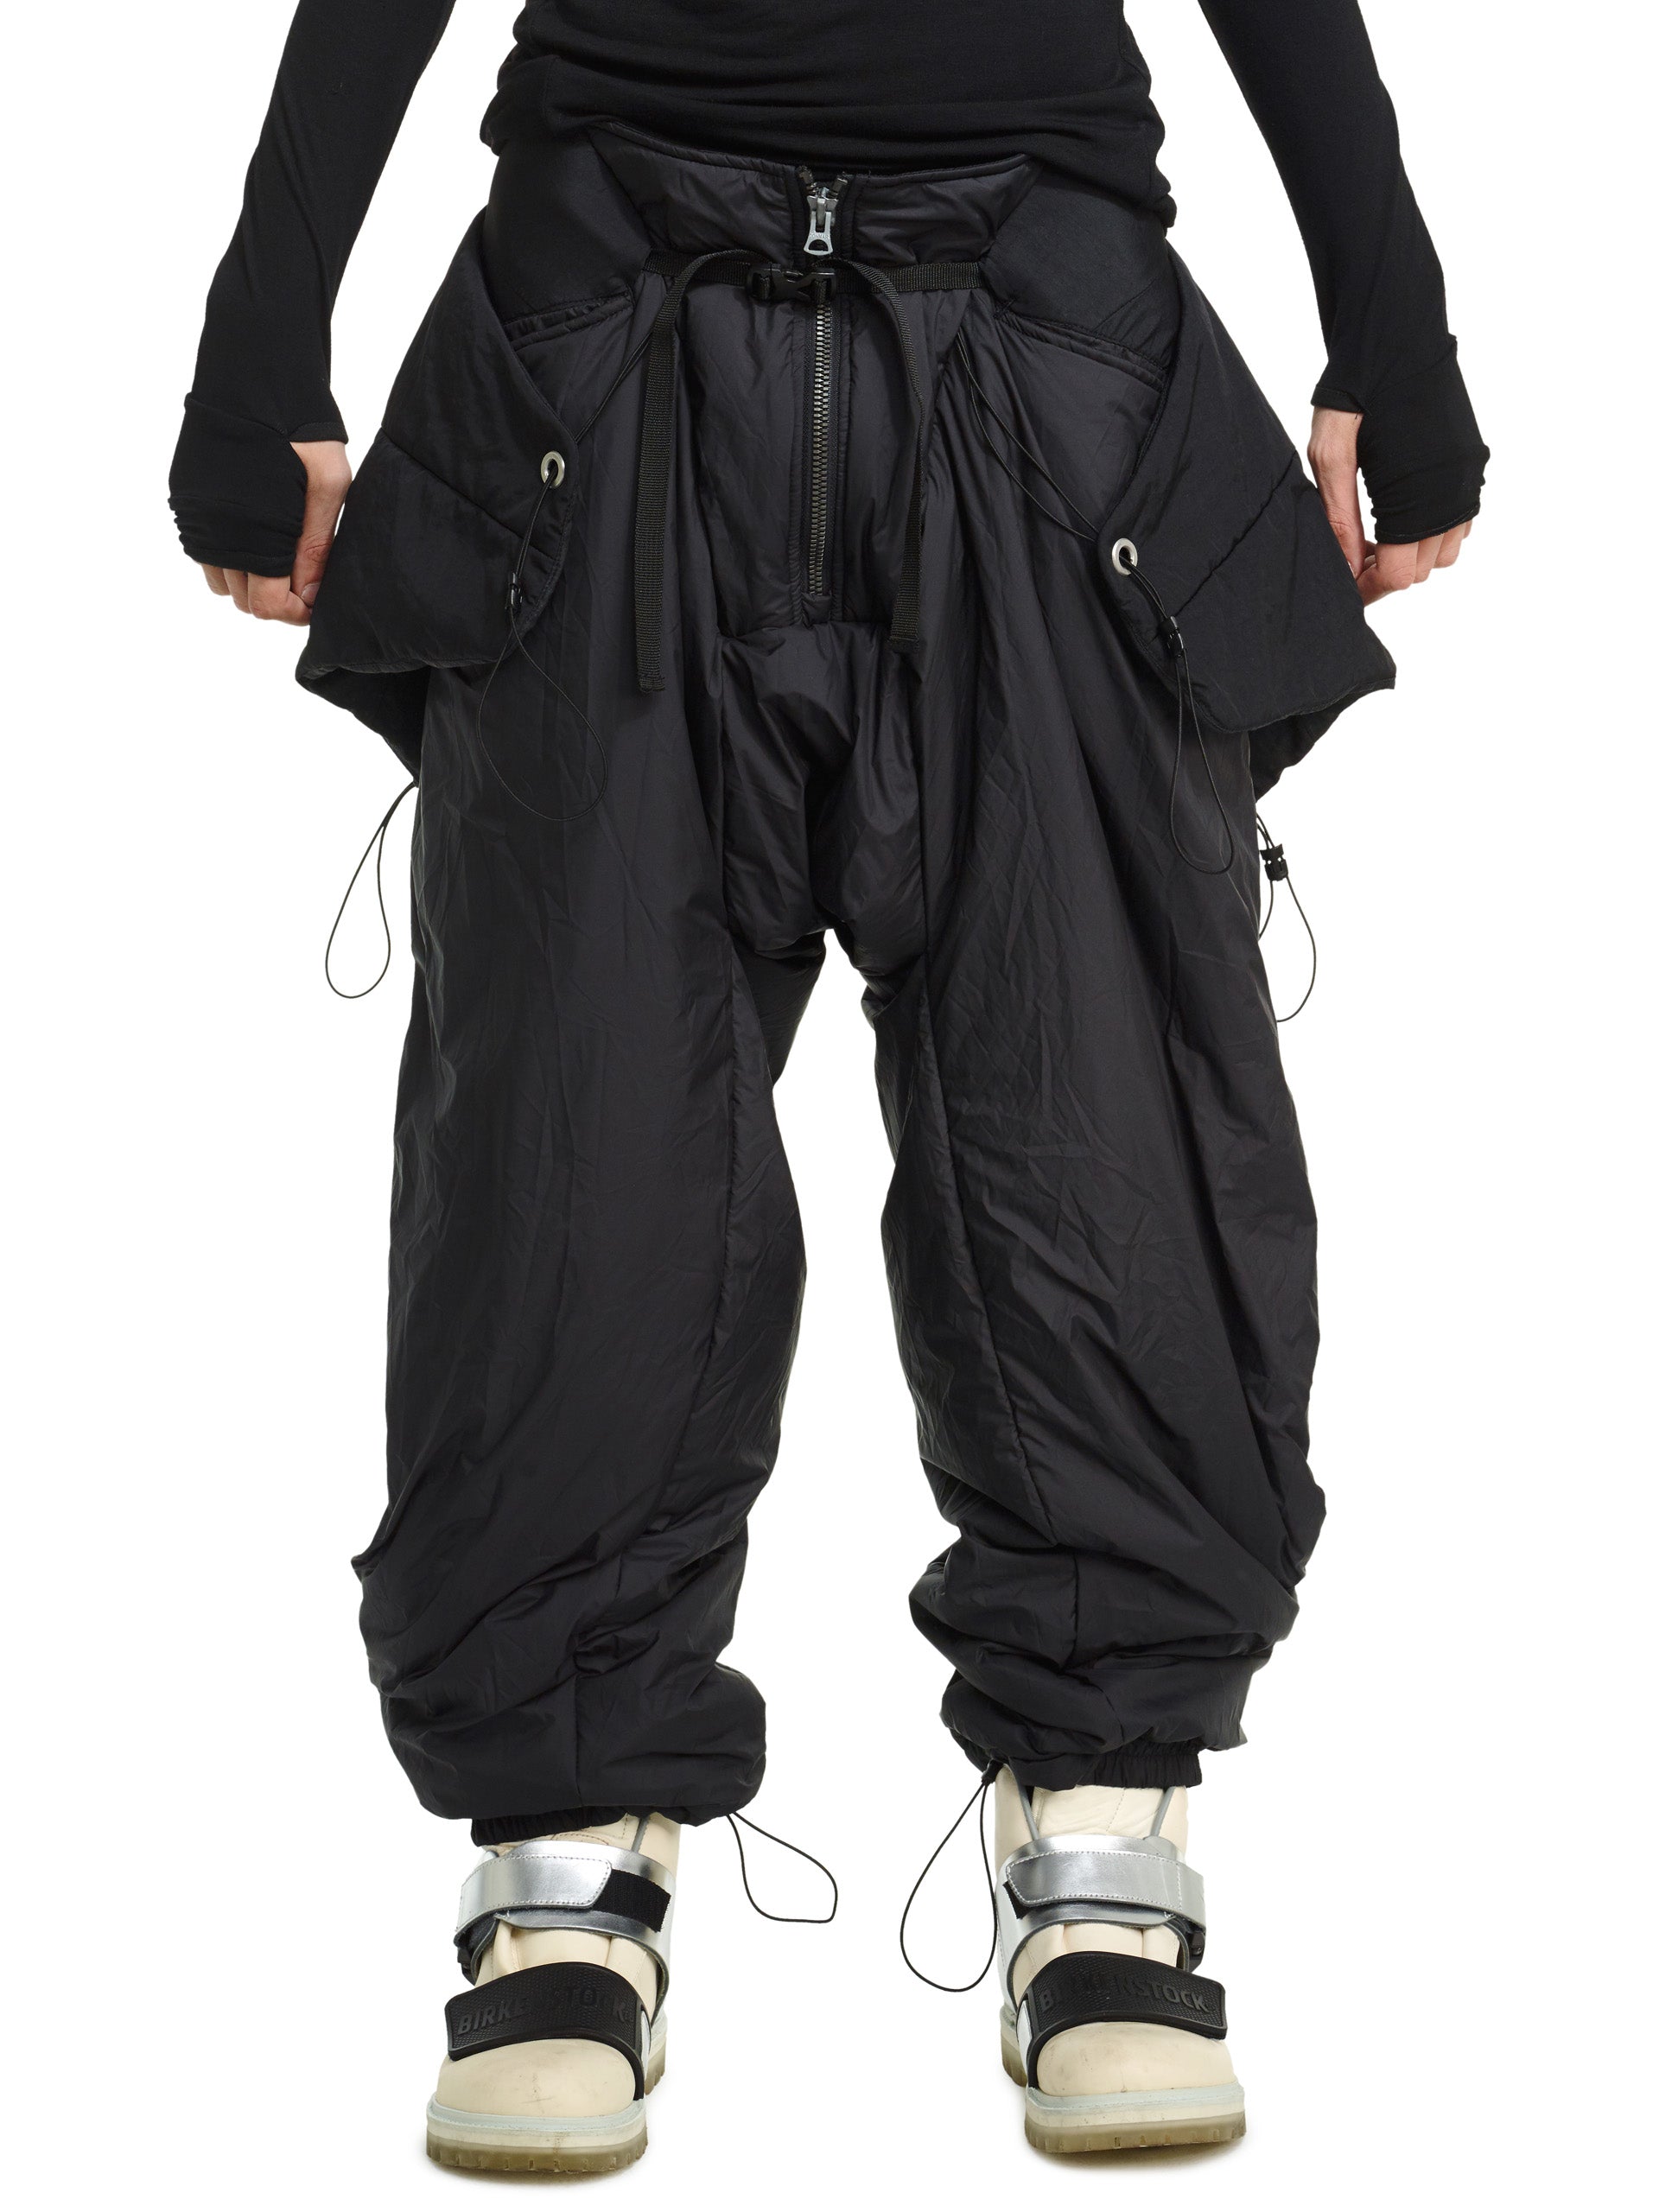 4 Best Gore-Tex Pants for Skiing or Snowboarding in 2023